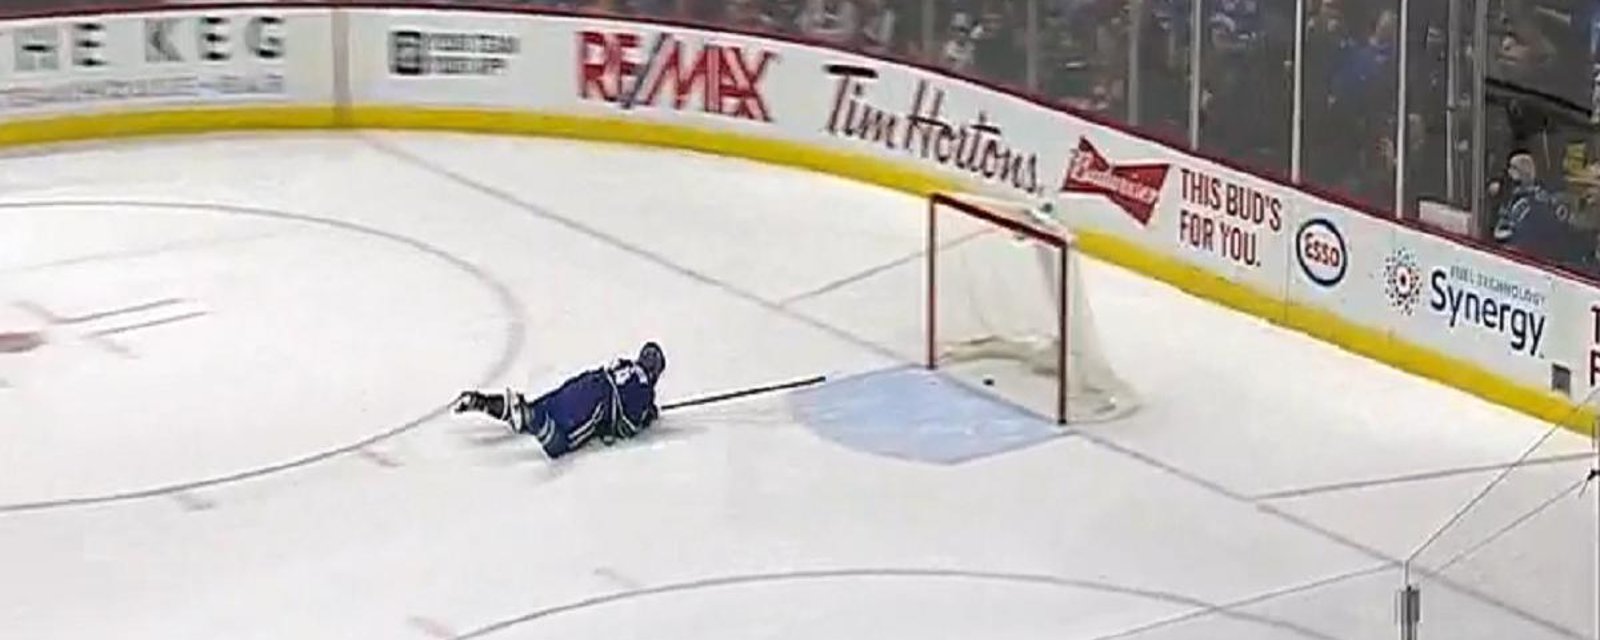 Must see: Brutal own goal by the Canucks